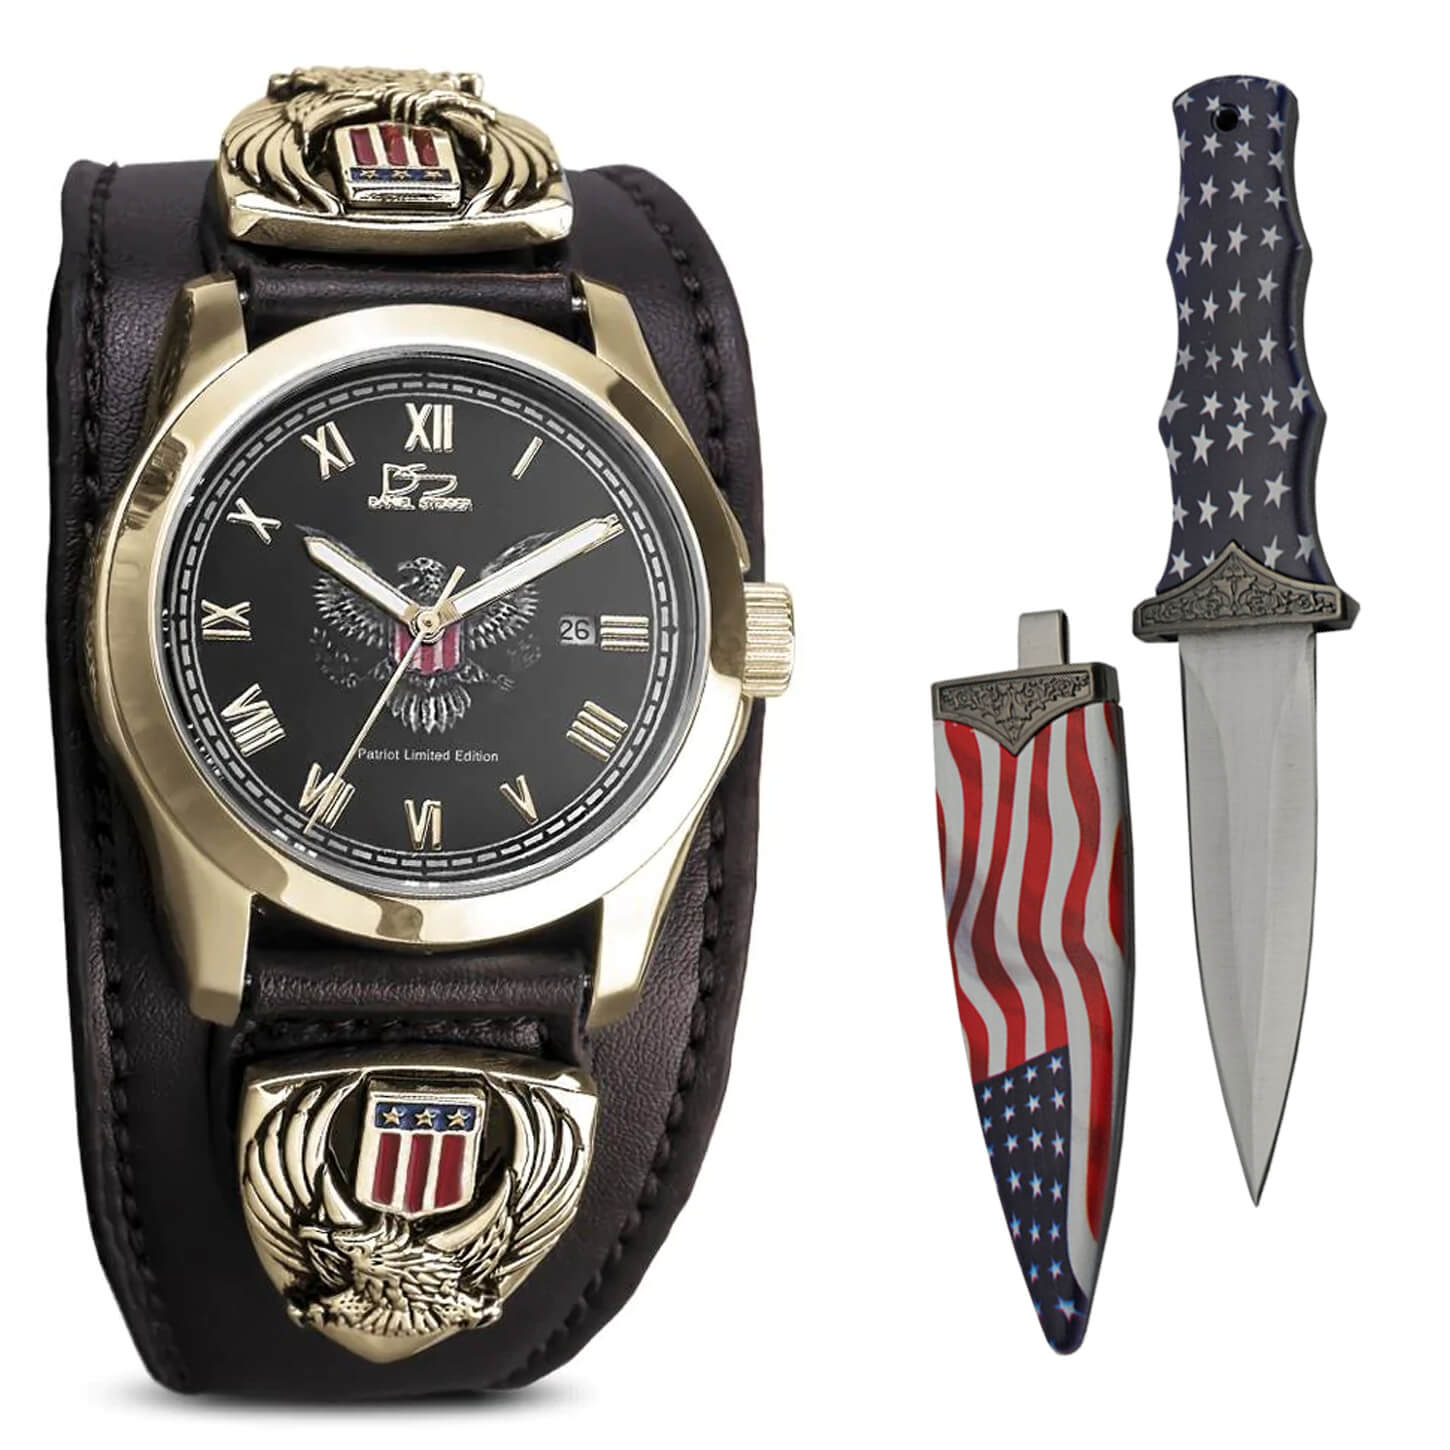  Daniel Steiger Patriot (Limited Edition) Luxury Leather 18k  Gold Watch - Water Resistant - Genuine Leather Cuff Style Strap -  Traditional American Detail - Solid Stainless Steel - 18k Gold Fused 